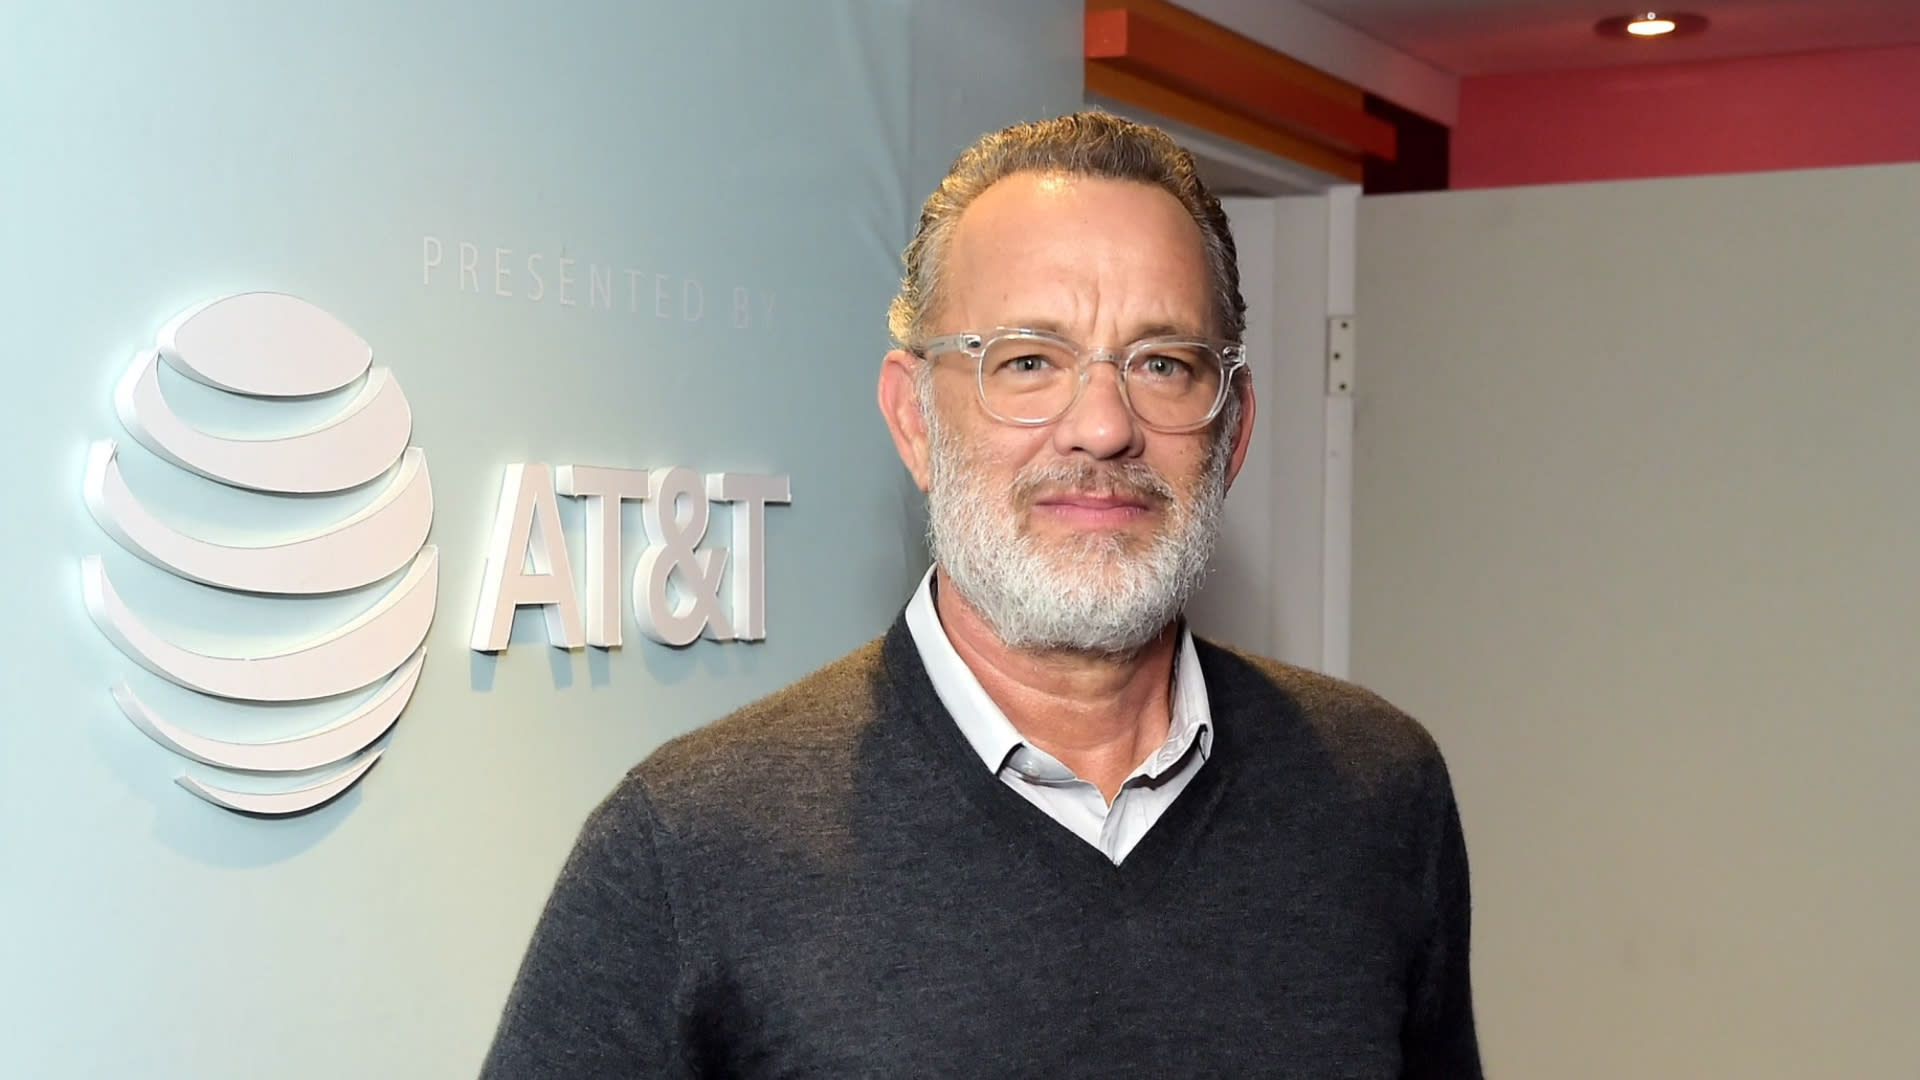 Tom Hanks experienced 'crippling body aches' during Covid ...